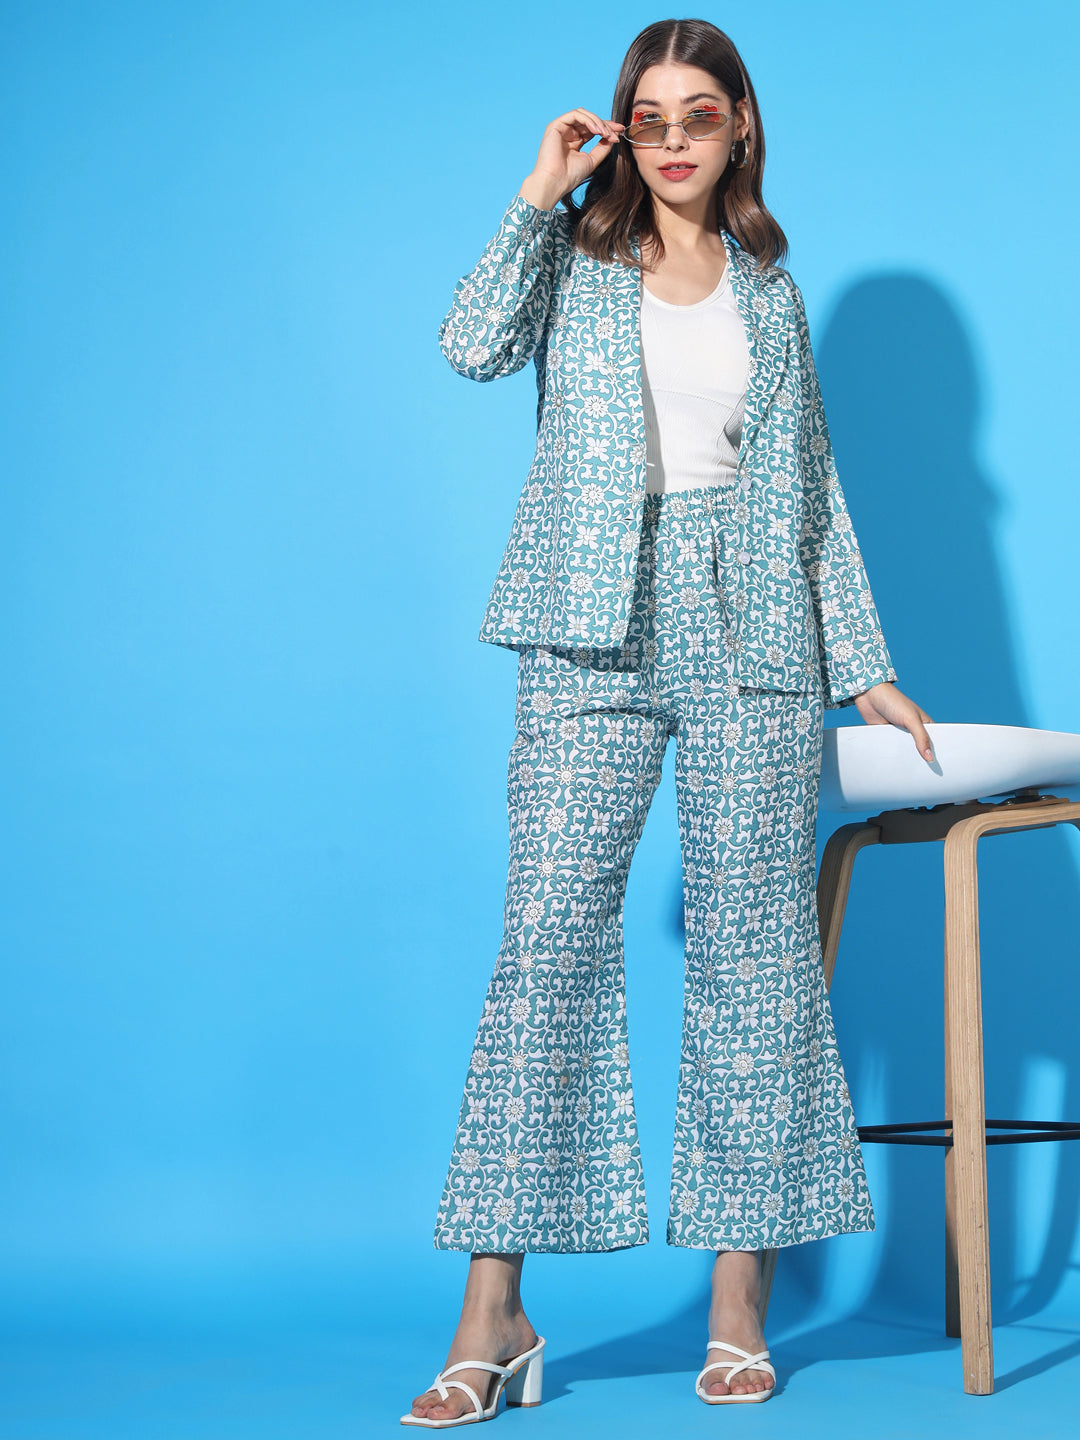 Women's Co-ord Cotton Blend Printed Long Sleeve Blazer Top and Full Length Pant Western Dress